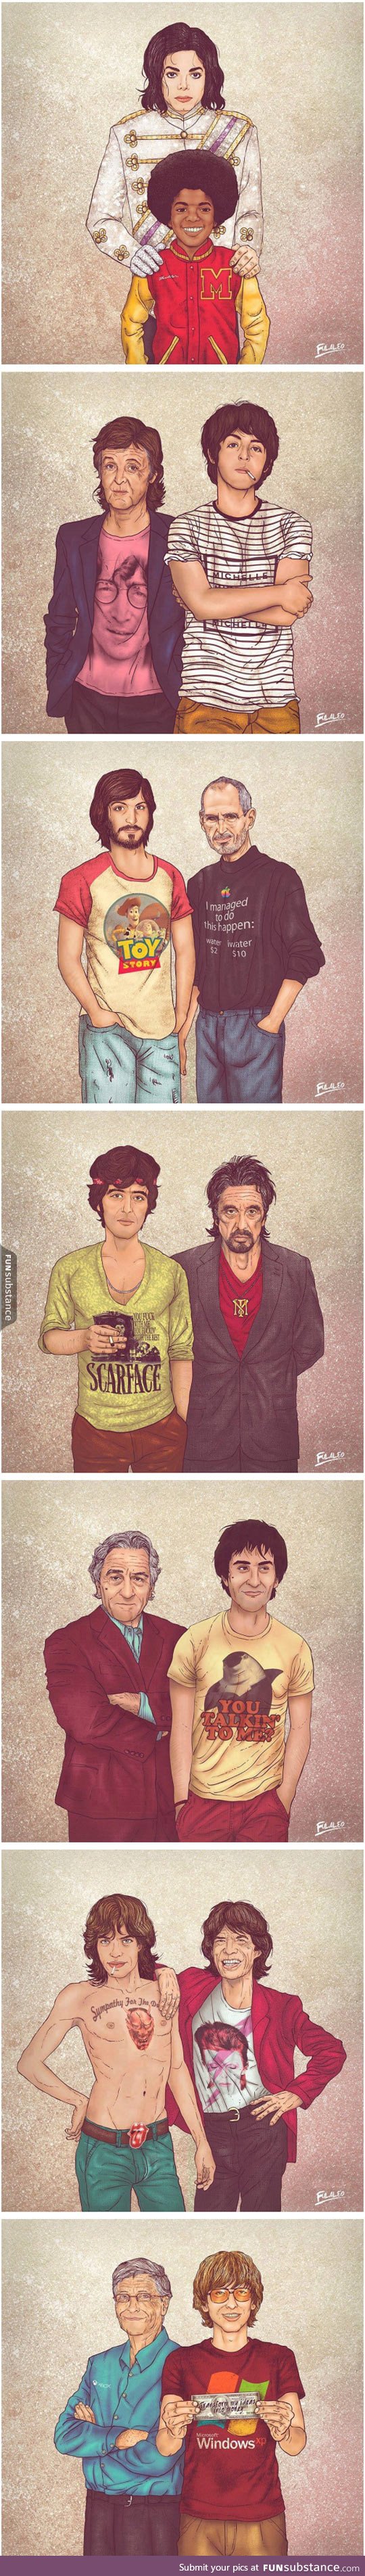 Famous people and their past selves